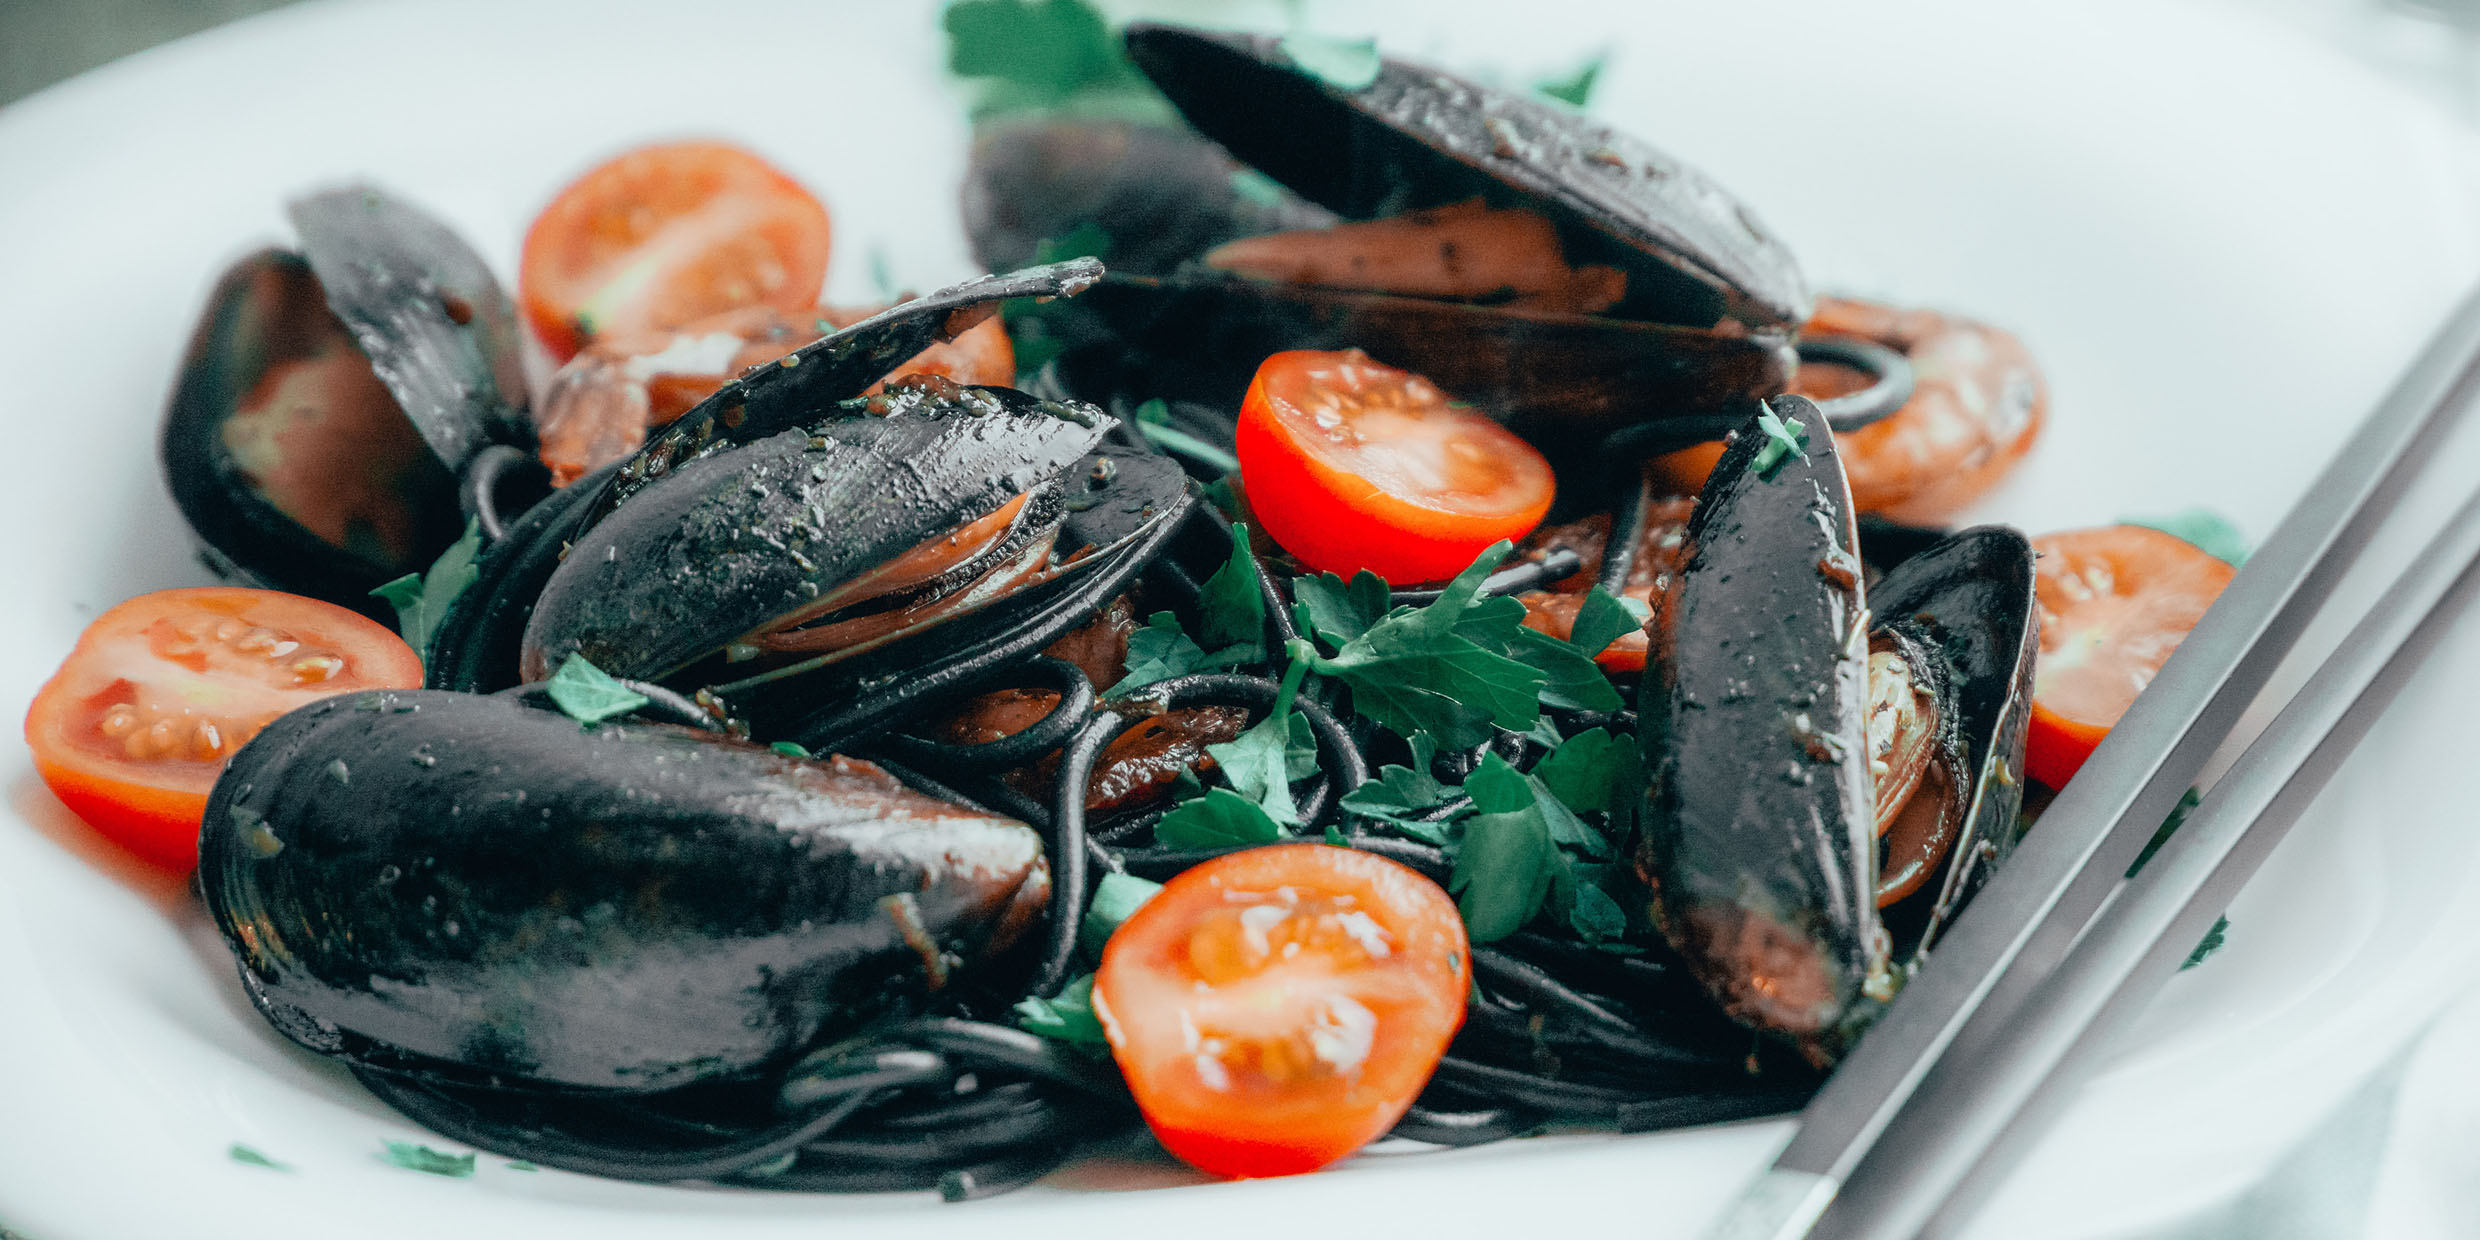 Image of a plate of mussels served with tomatoes and greens